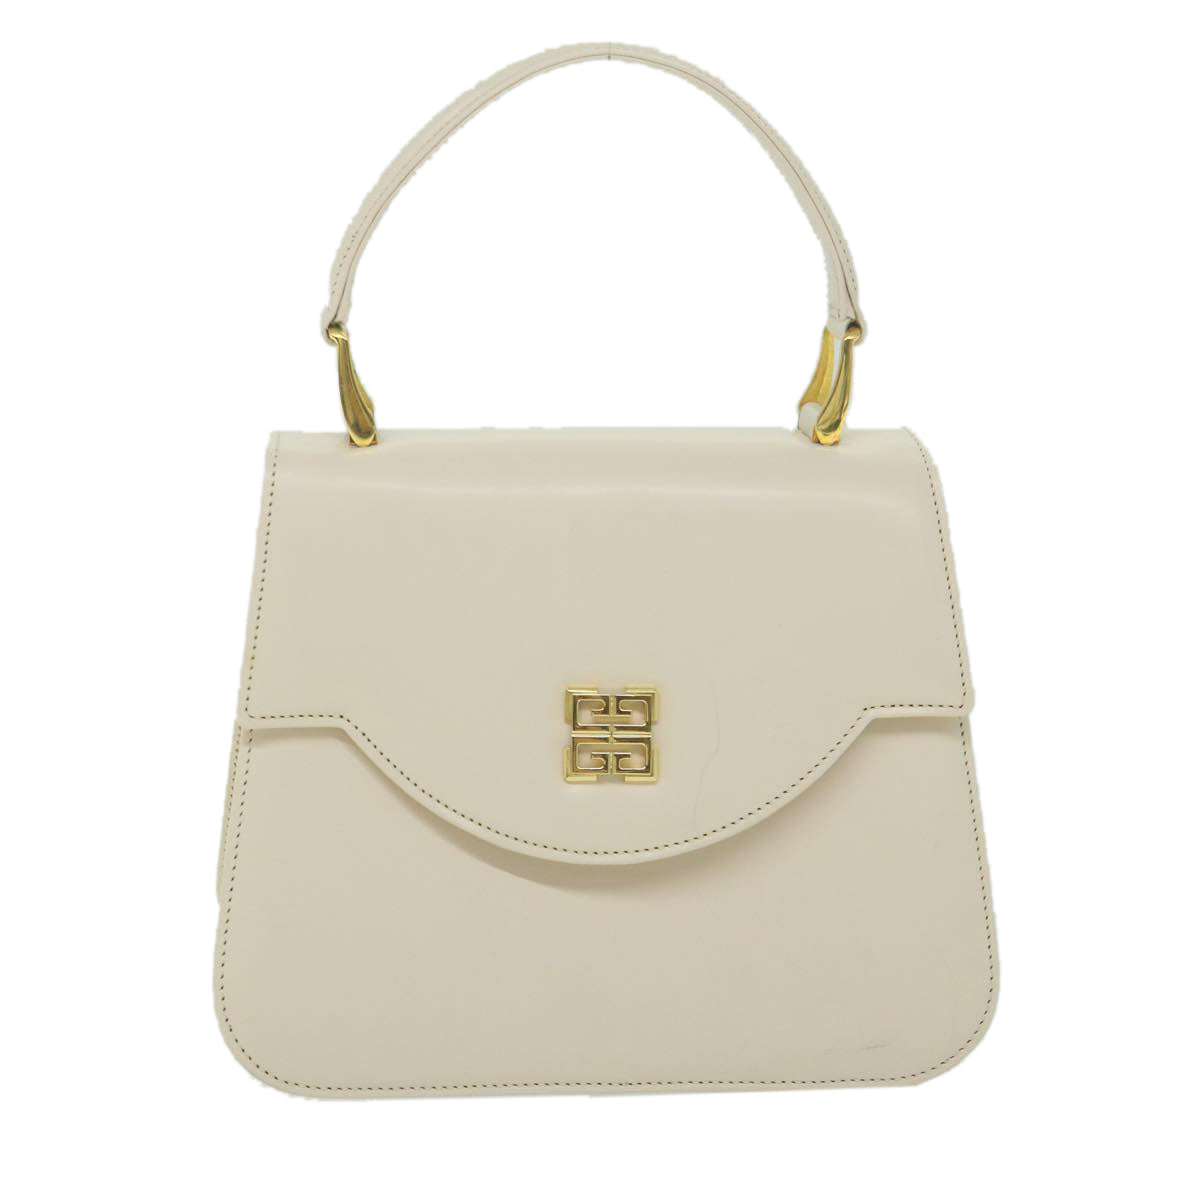 GIVENCHY Hand Bag Leather White Auth bs11606 - 0